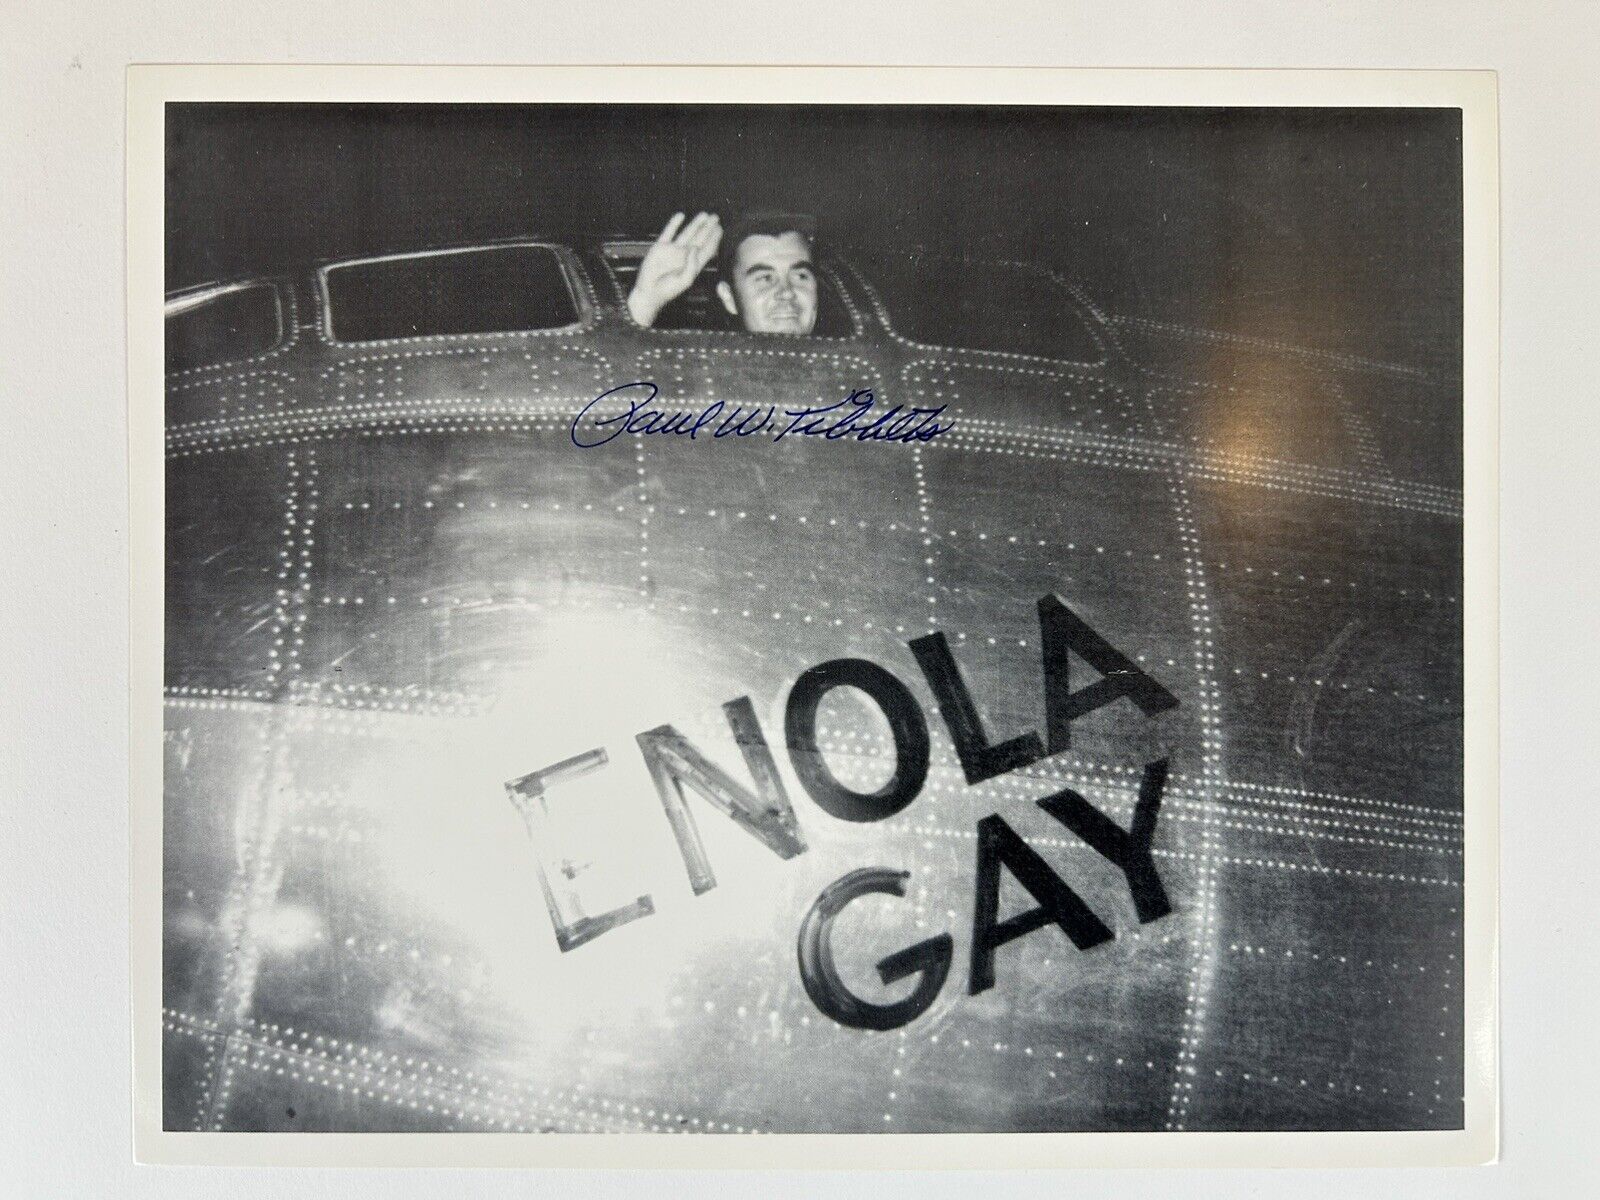 Paul Tibbets Signed 8” x 10” WWII Enola Gay Pilot